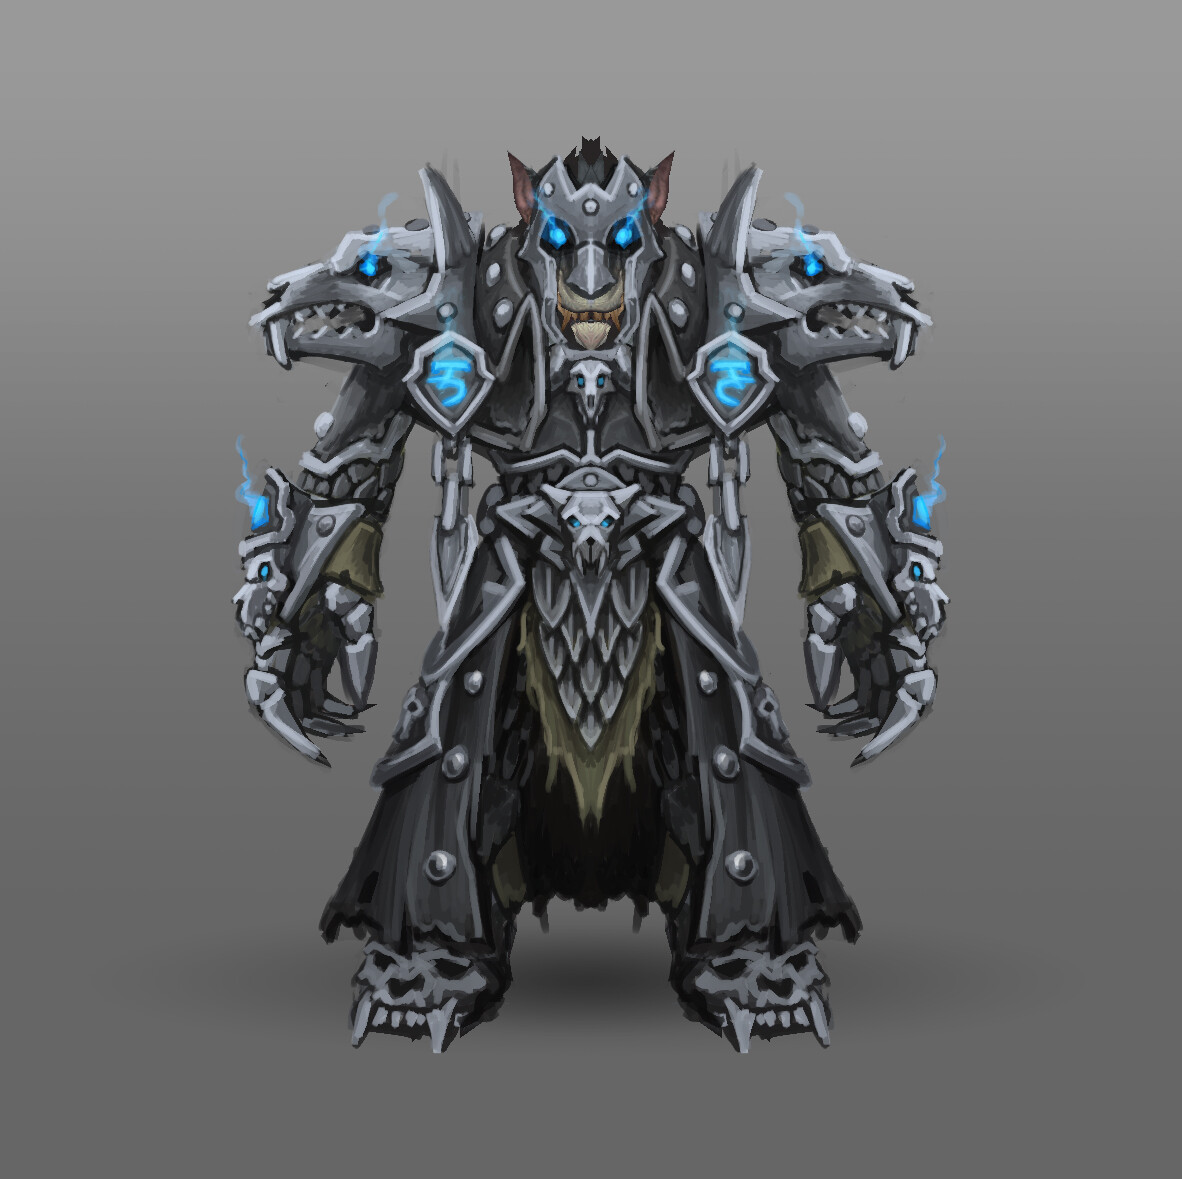 Deathknight
For the second version I wanted to add more of a wolf theme to the set to make it distinct for worgen, As well as adding a long coat.